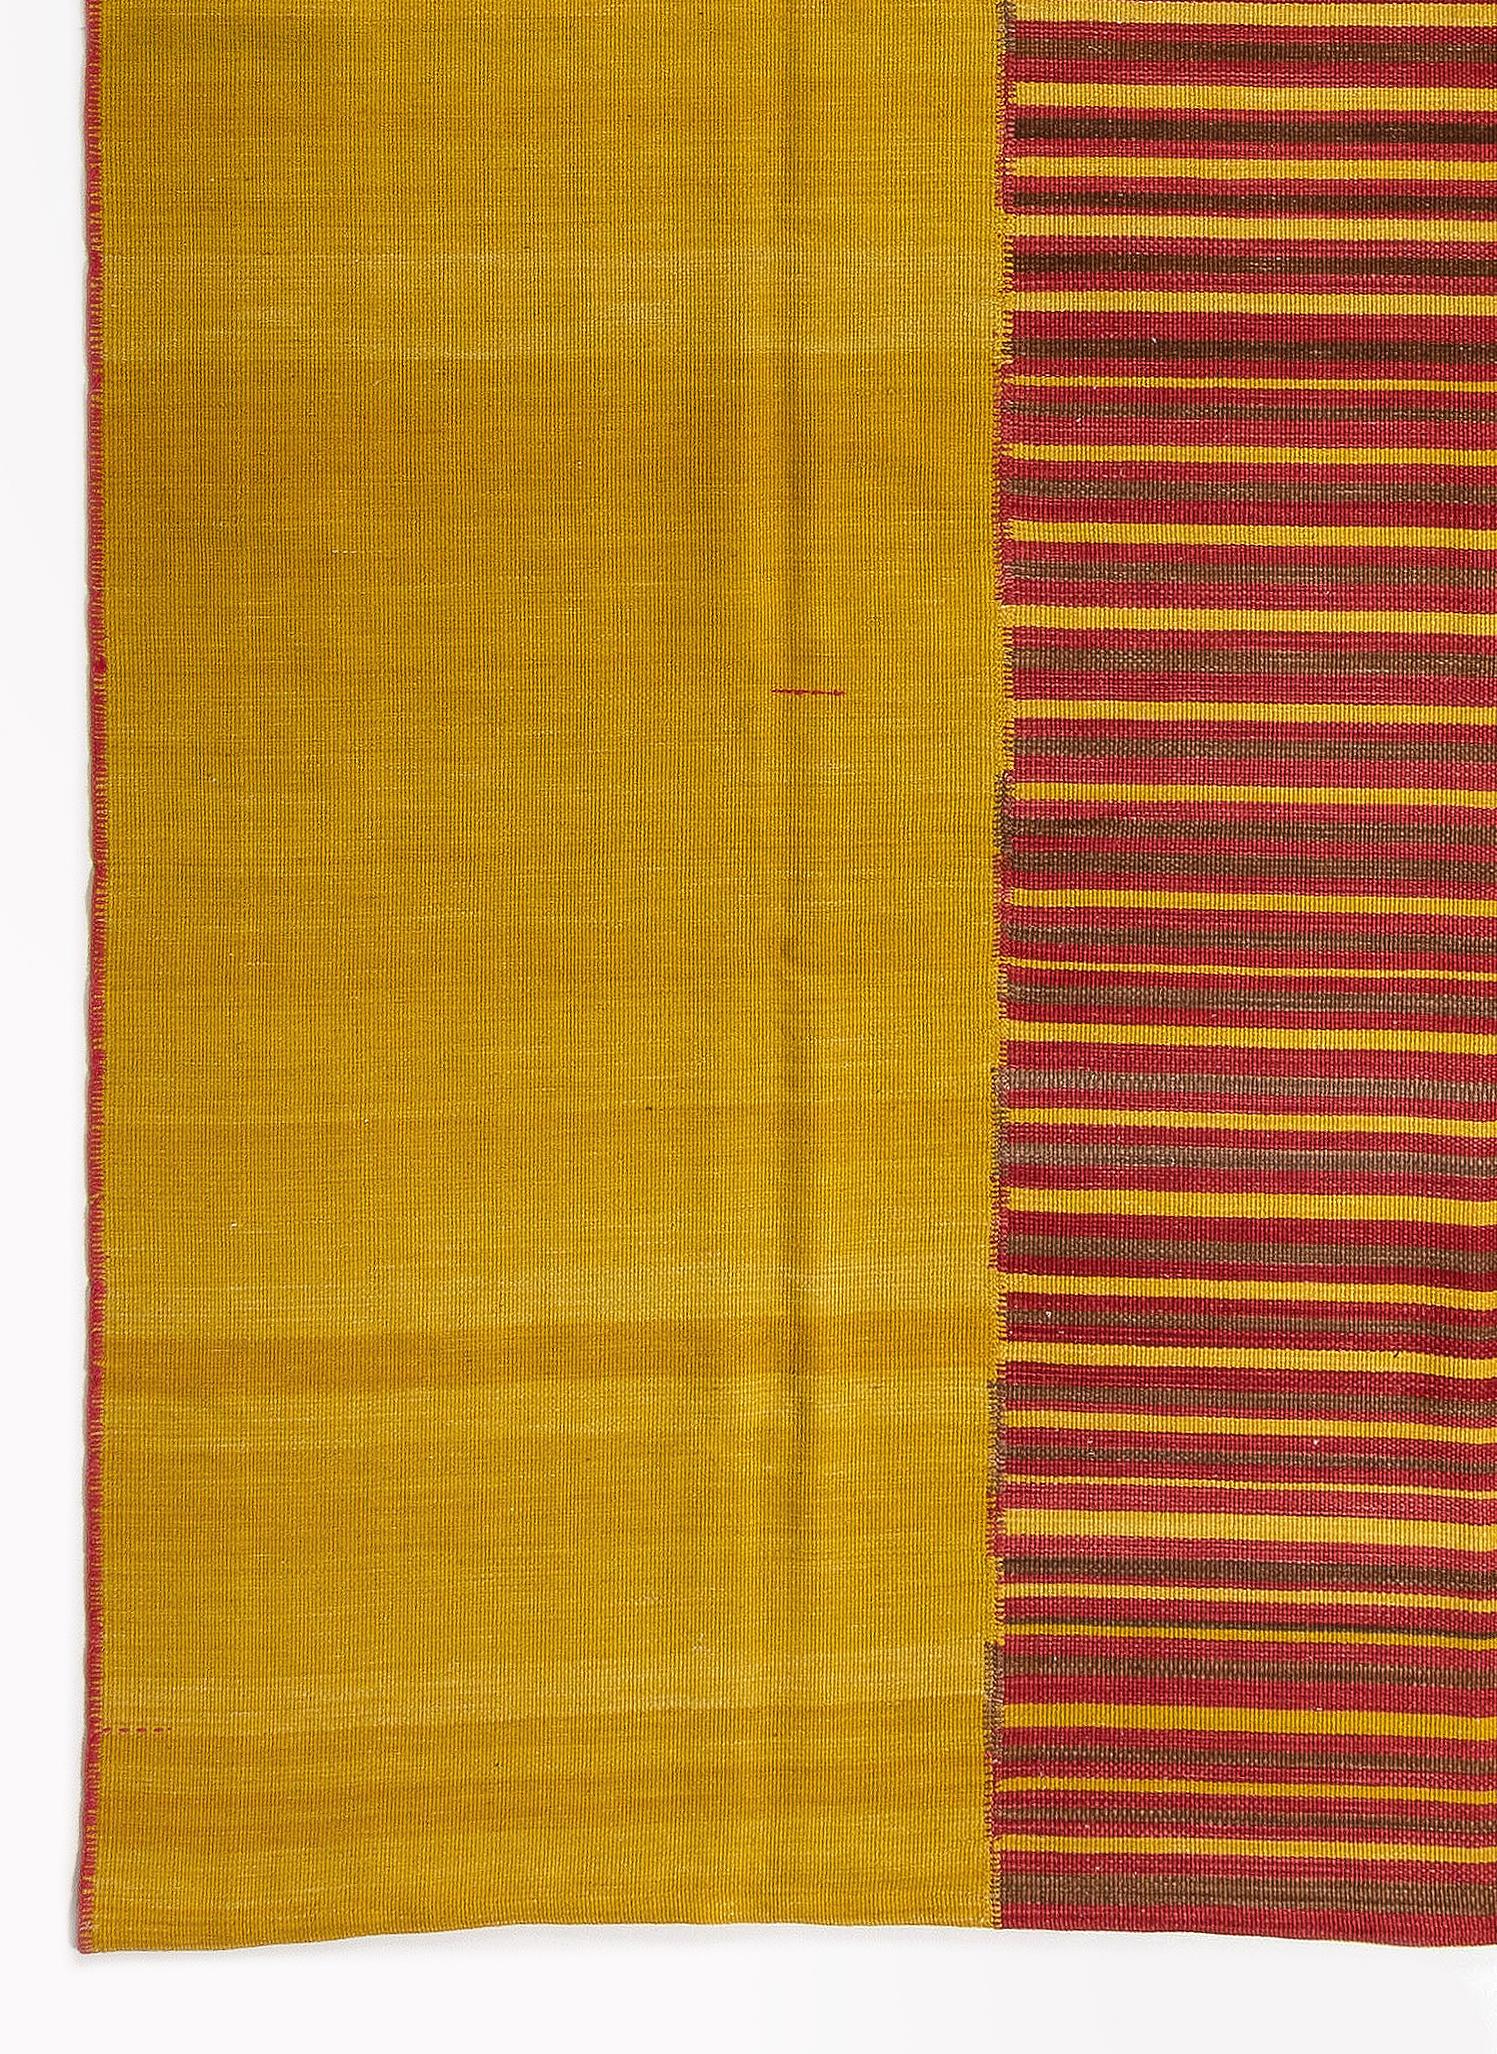 Hand-Woven 8.8x11.4 Ft Modern Striped Anatolian Double Sided Wool Kilim. Yellow and Red Rug